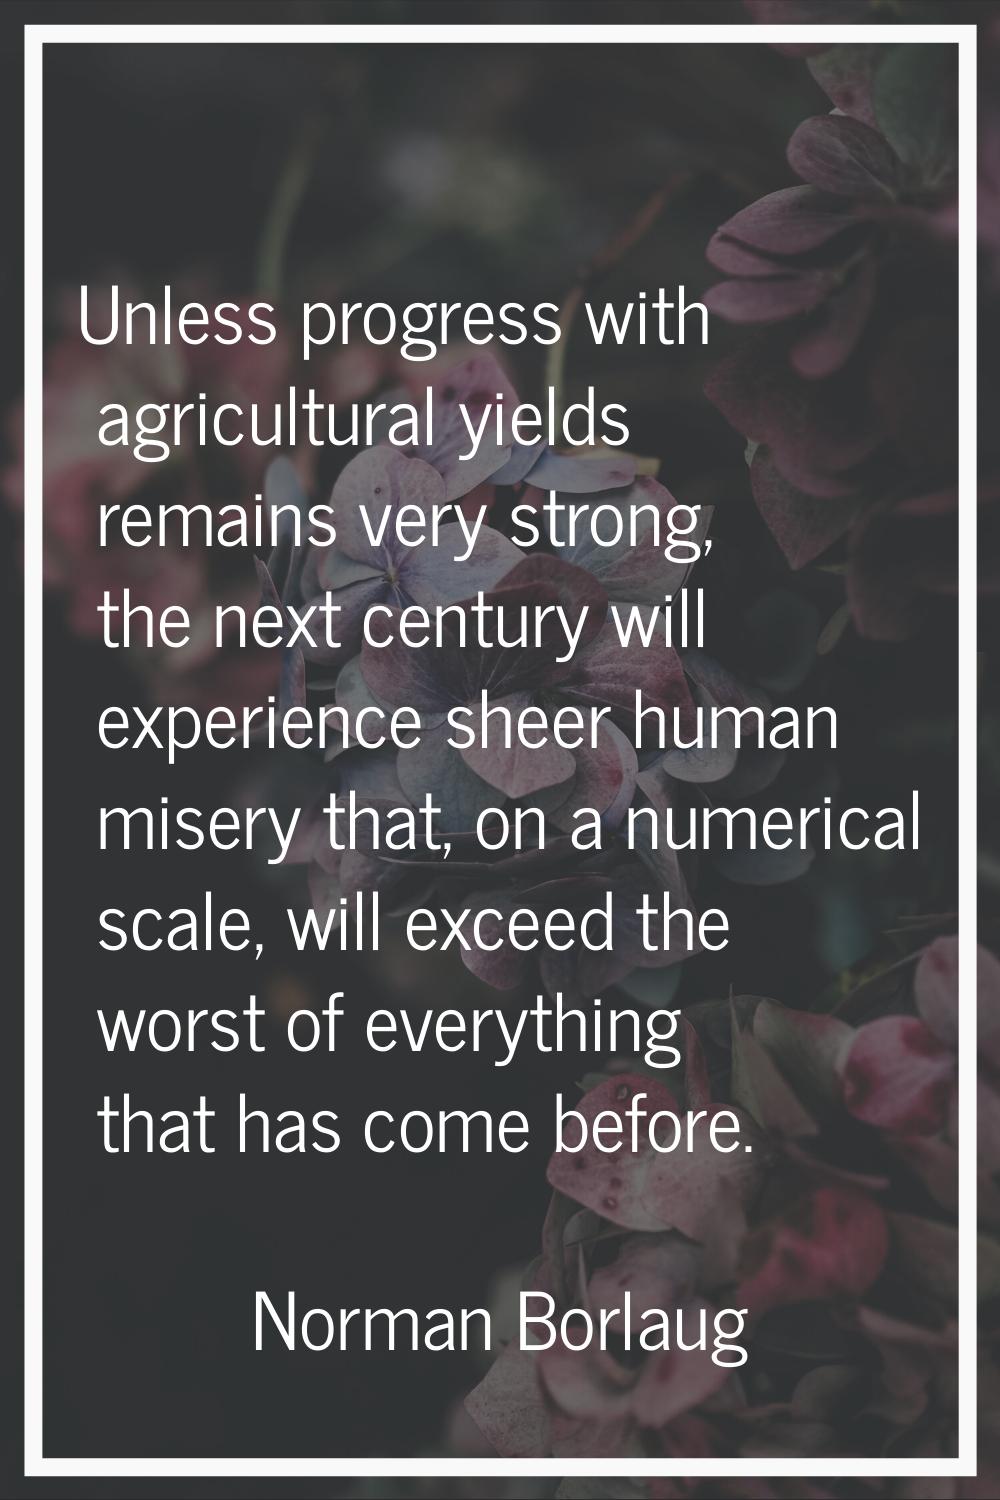 Unless progress with agricultural yields remains very strong, the next century will experience shee